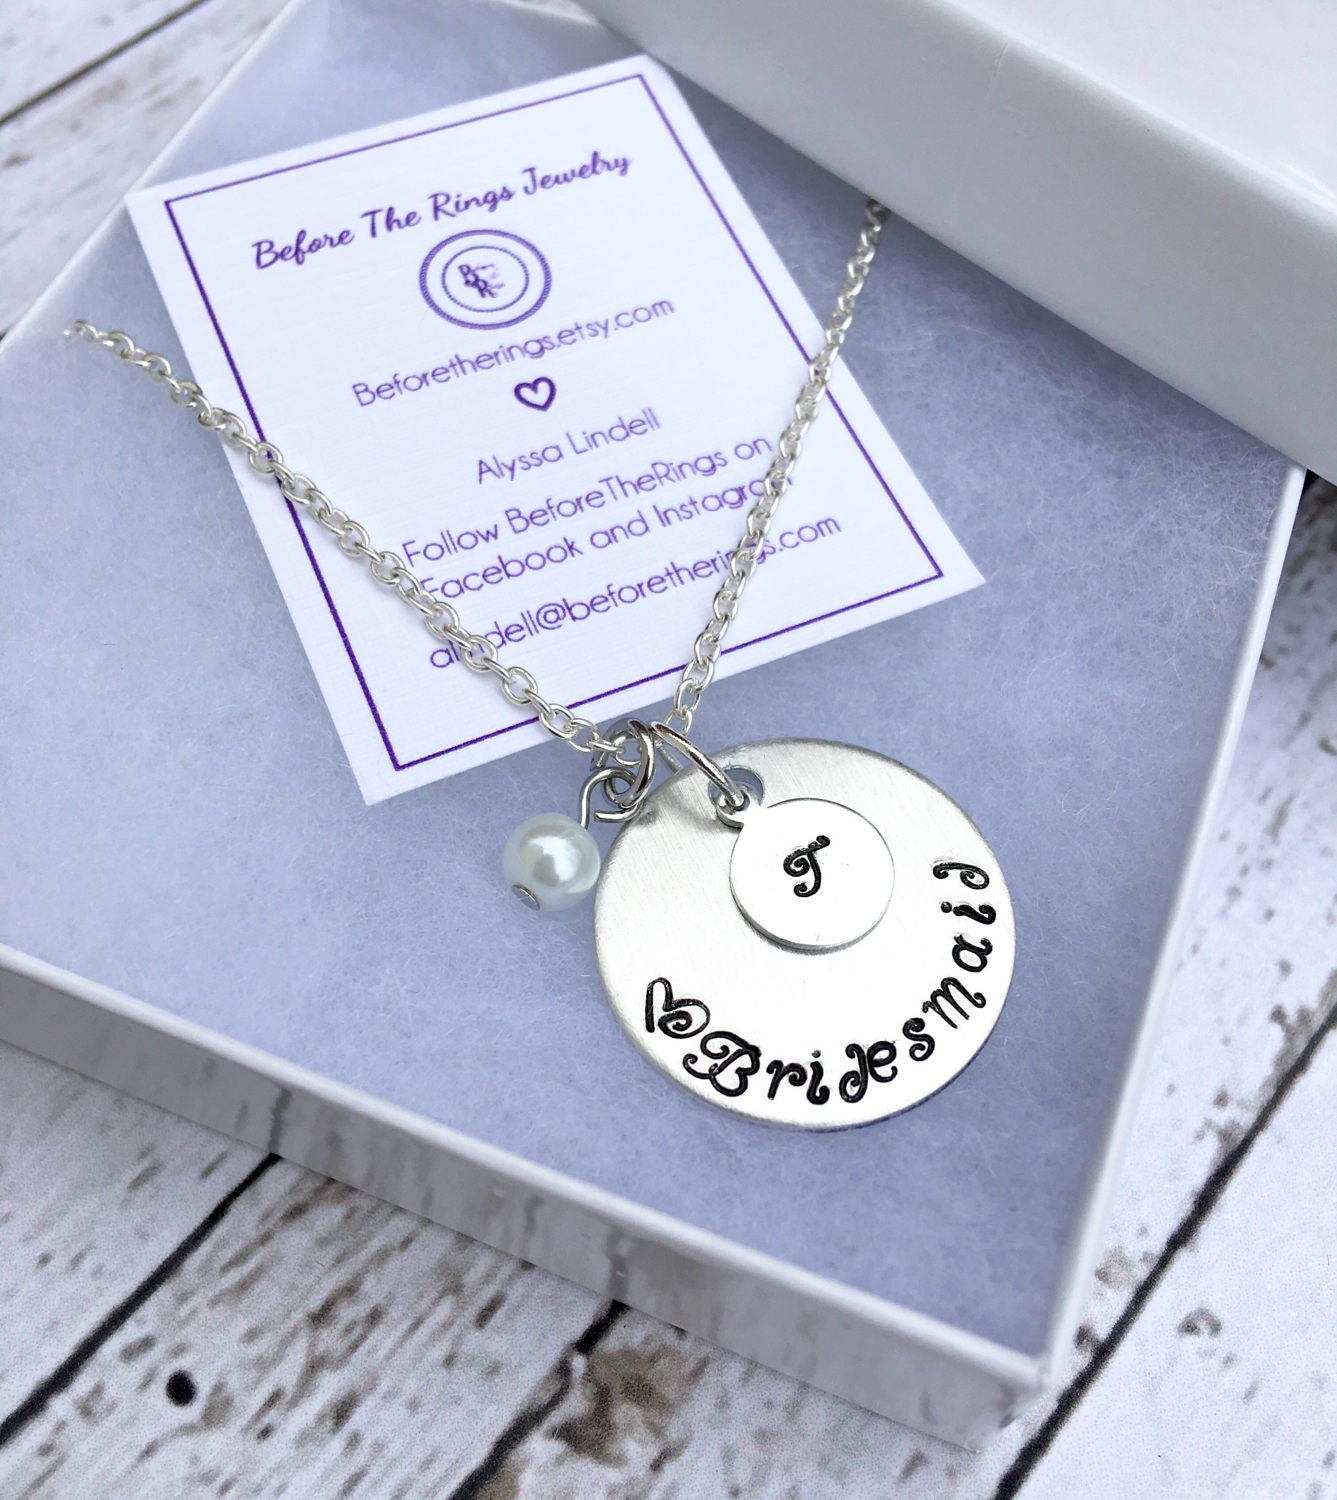 Bridesmaid Stamped Necklace with Initial Proposal Jewelry | Etsy